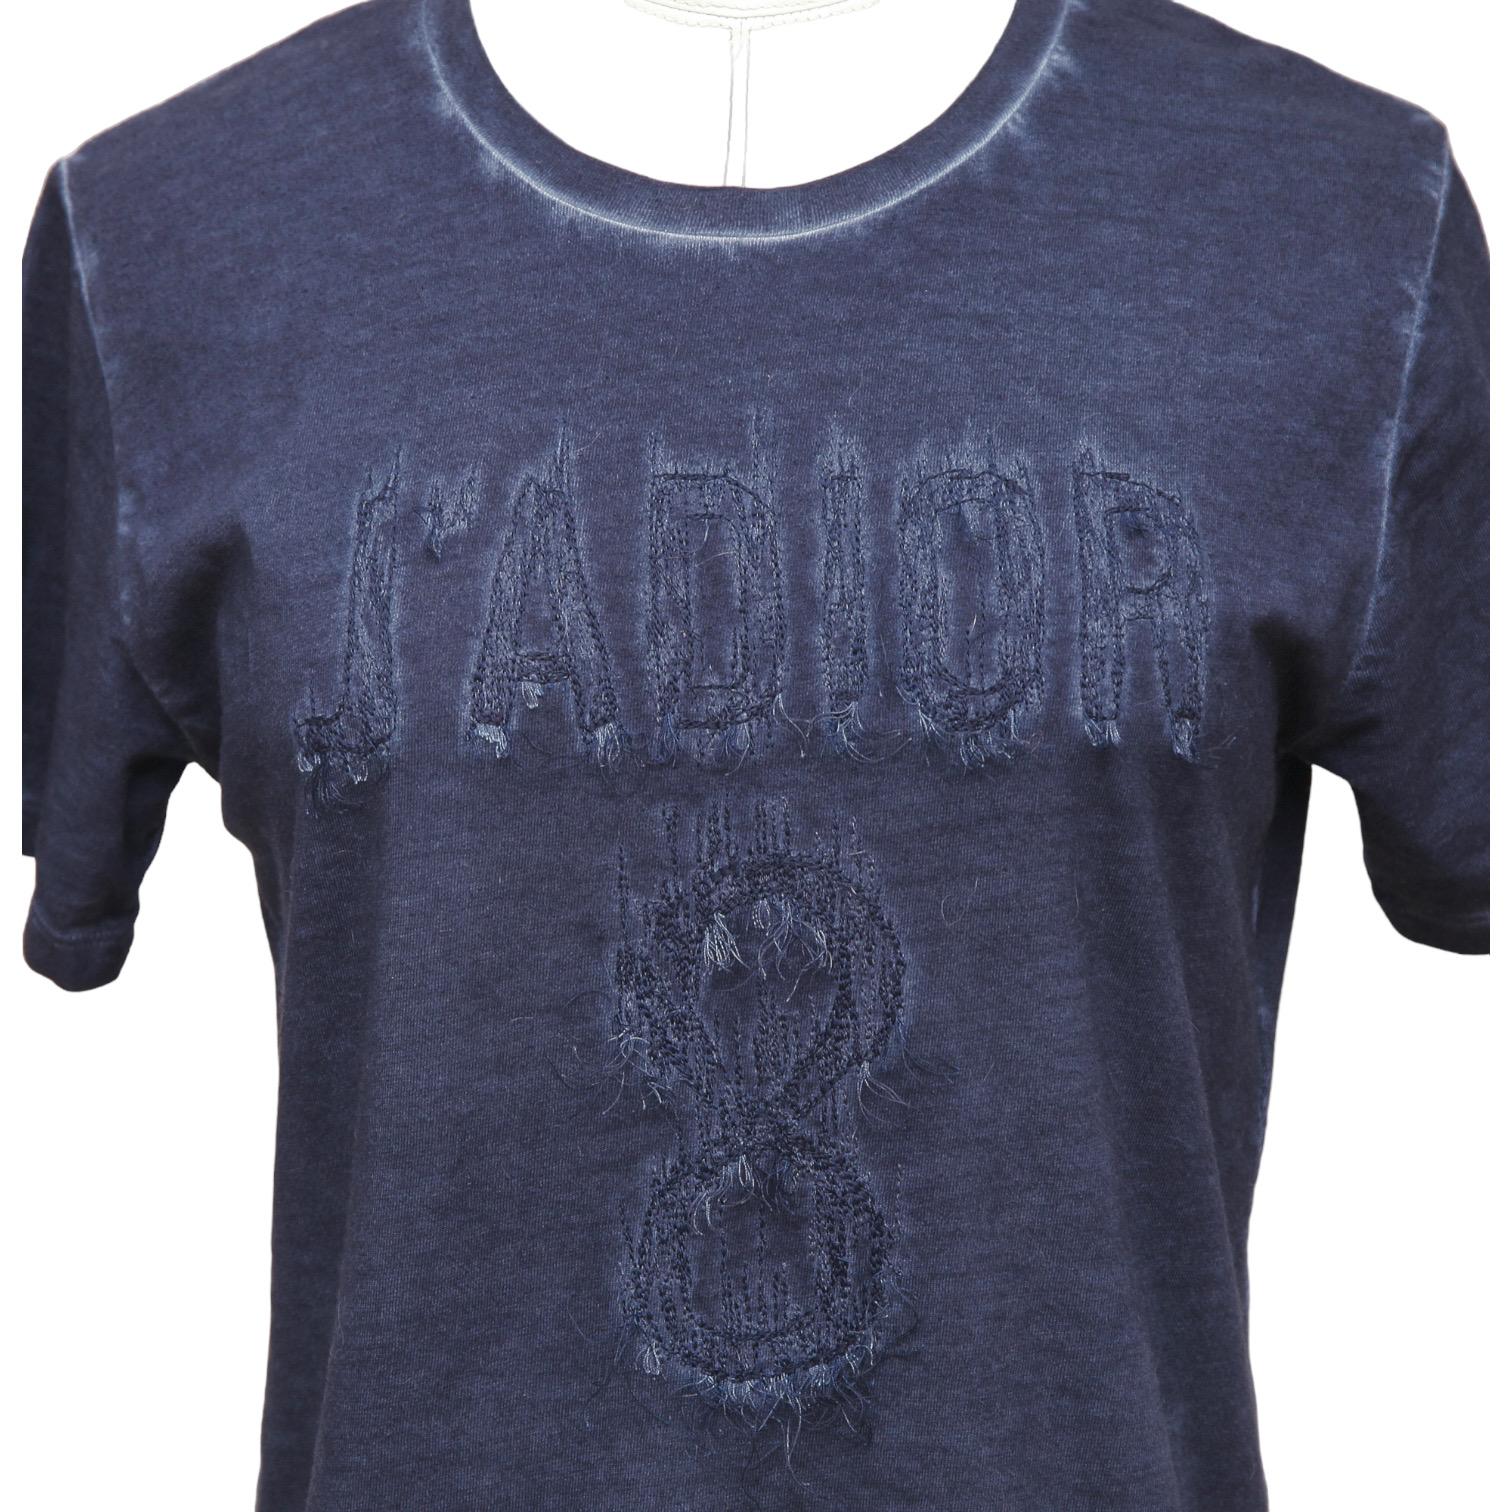 GUARANTEED AUTHENTIC CHRISTIAN DIOR NAVY J'ADIOR 8 T-SHIRT

Design:
- J'Adior 8 logo t-shirt in a navy blue tie-dye.
- Fringe design to the logo.
- Crew neck.
- Short sleeve.
- Slip on.

Size: XS

Material: 85% Cotton, 15% Linen

Measurements